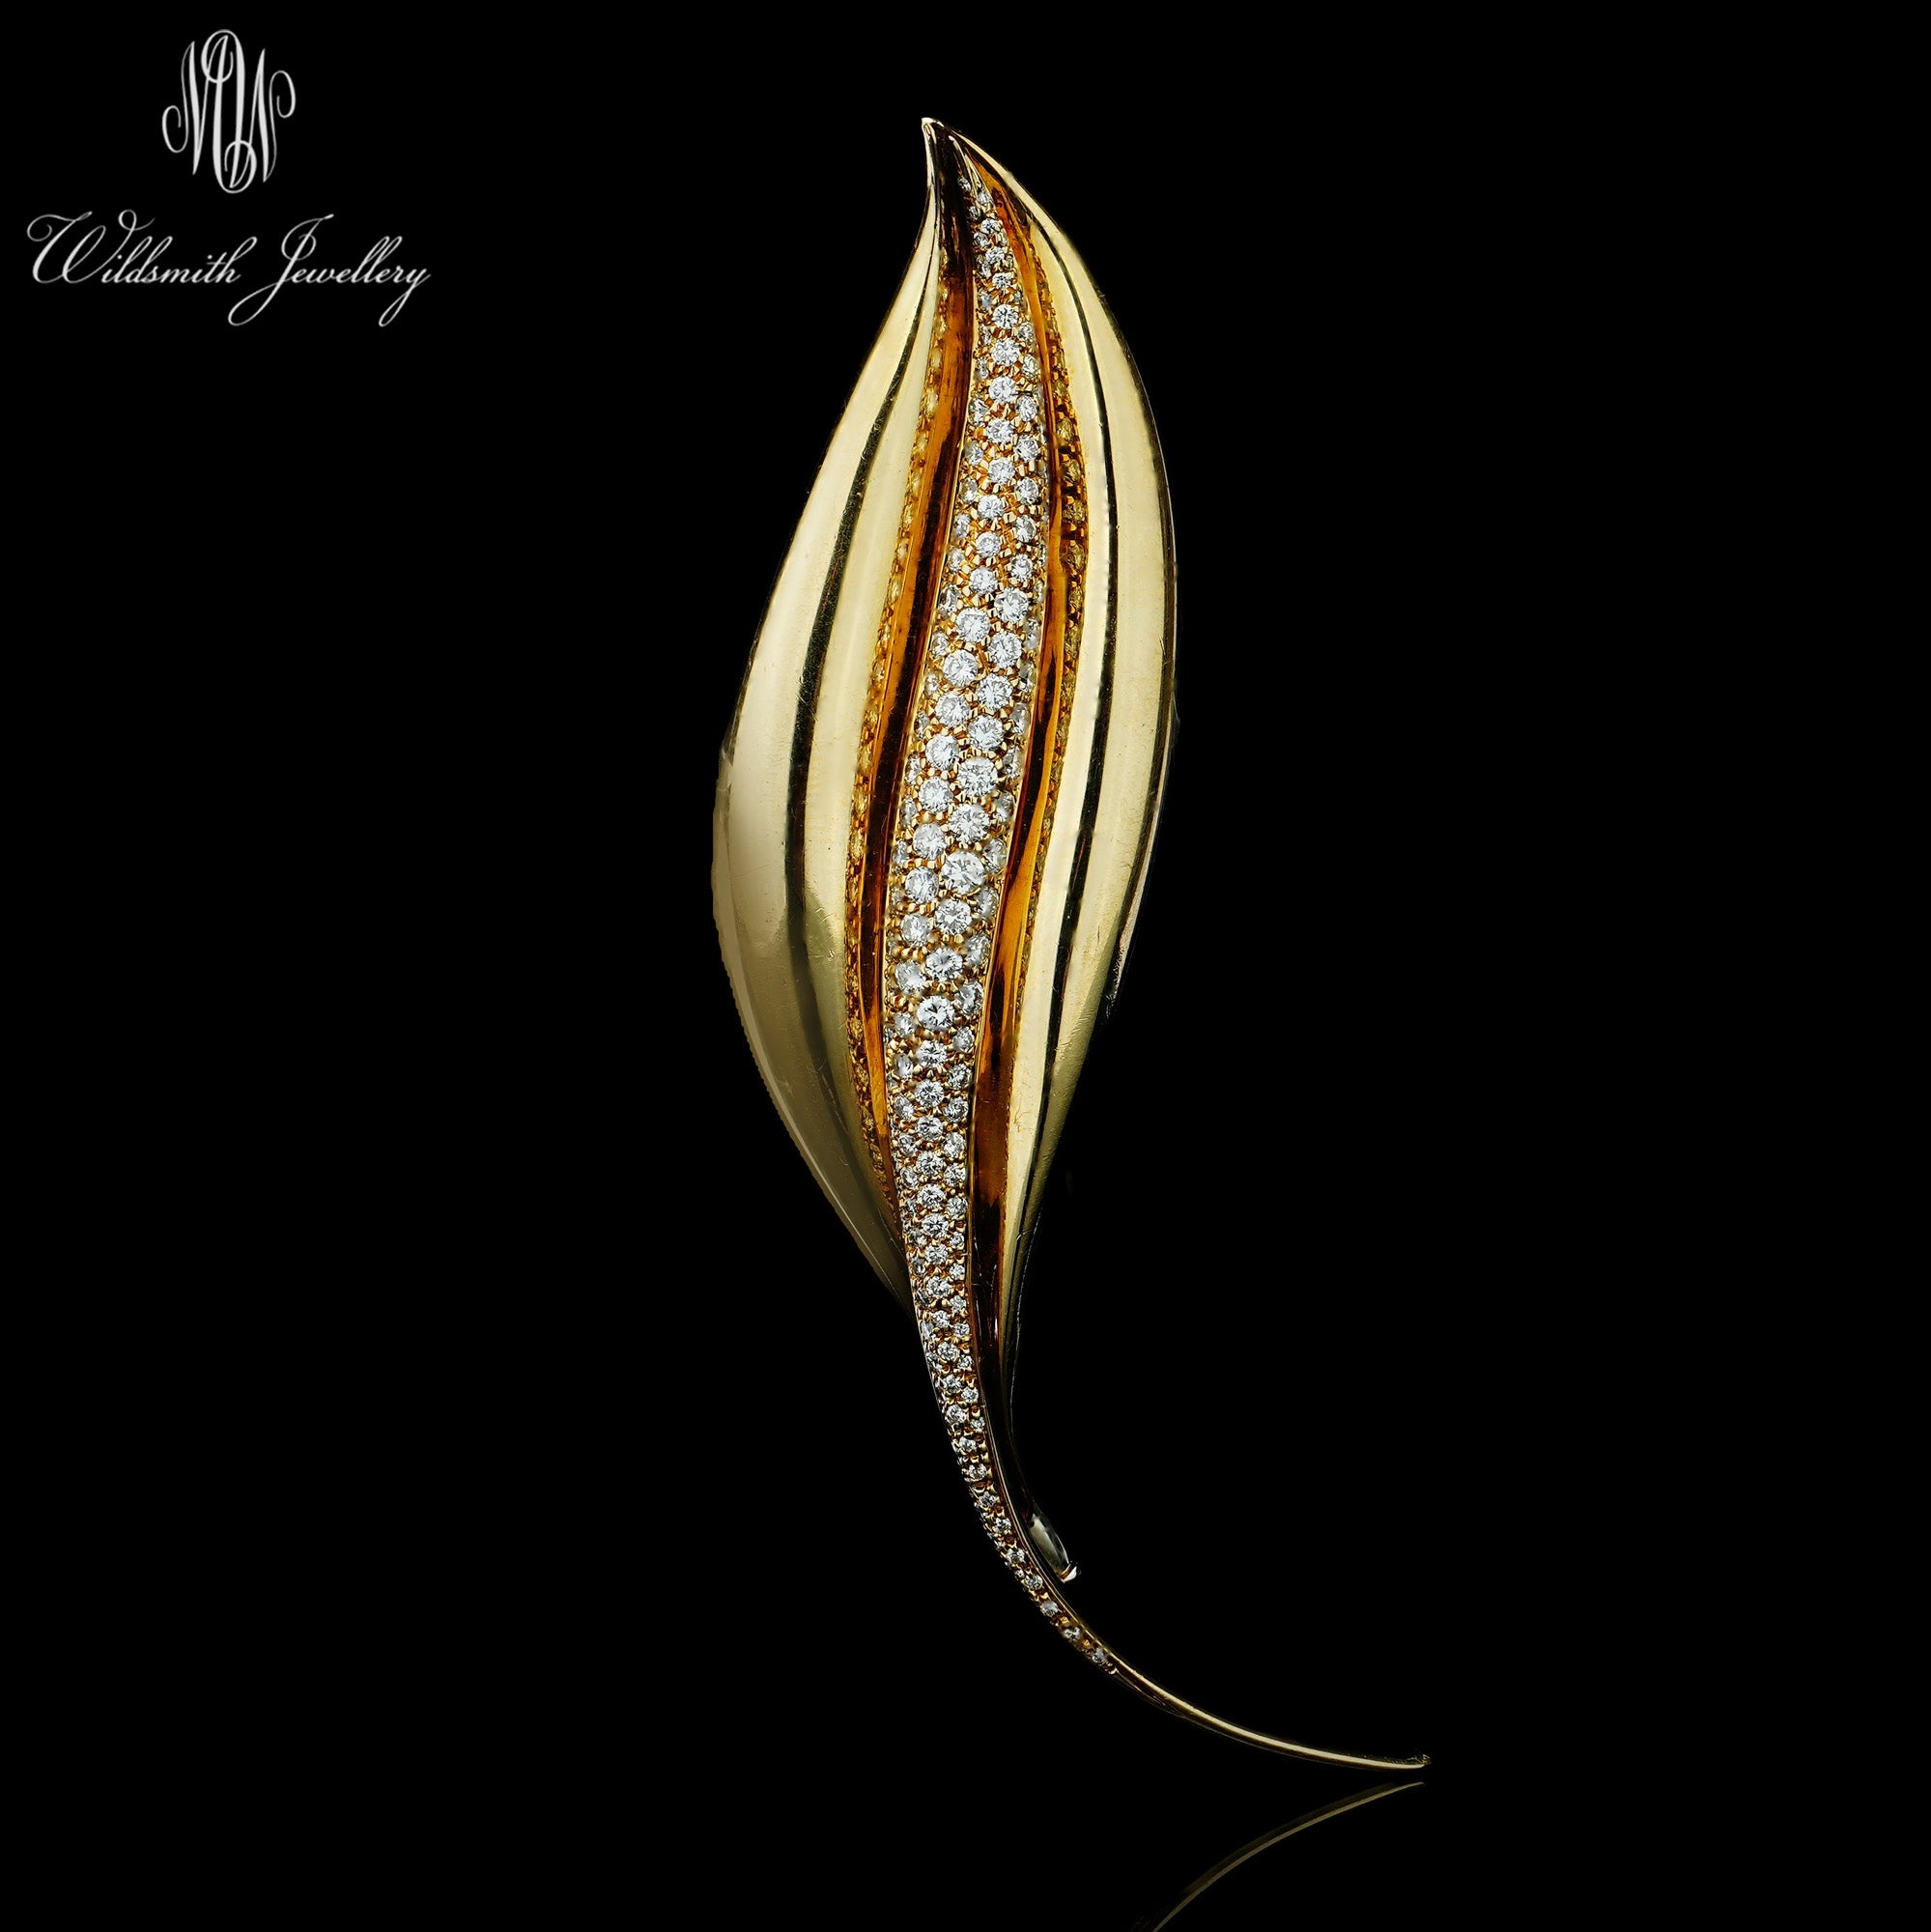 18ct Gold & Diamond Lily Brooch - Wildsmith Jewellery Brooches & Lapel Pins